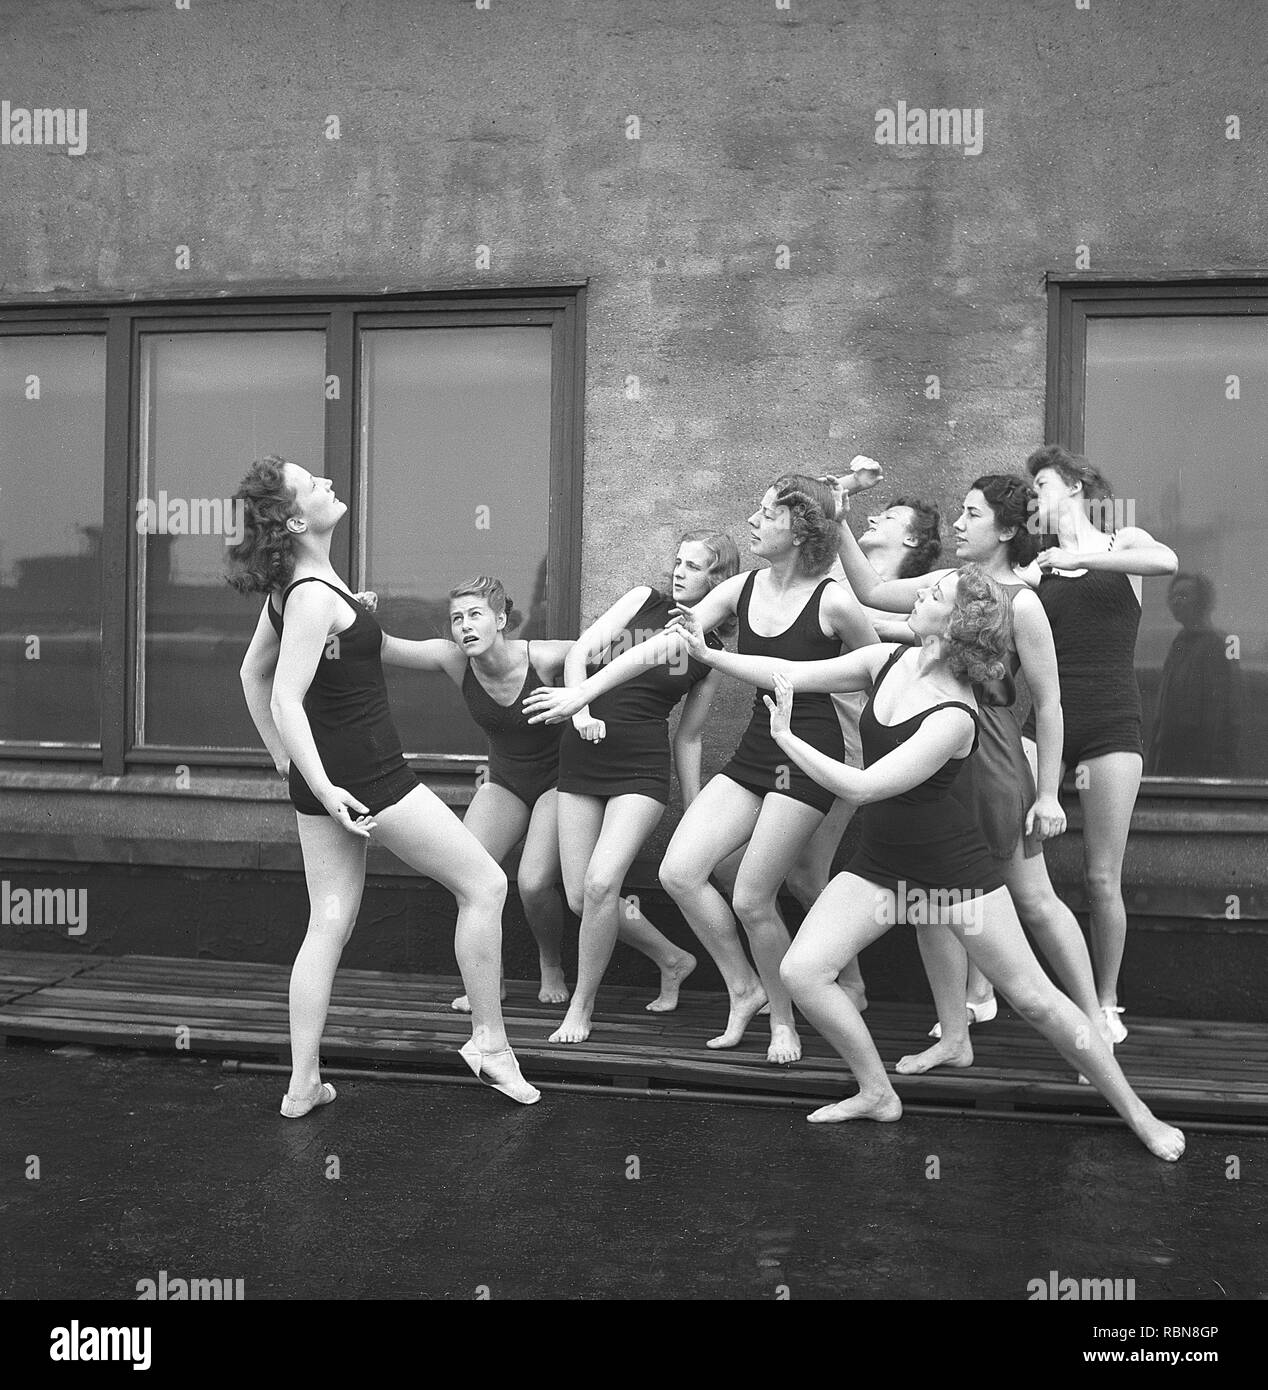 Gymnasts in the 1940s. A group of women gymnasts are training together on a top of a building.  Sweden  Photo Kristoffersson Ref O7-1-6. Sweden 1945 Stock Photo